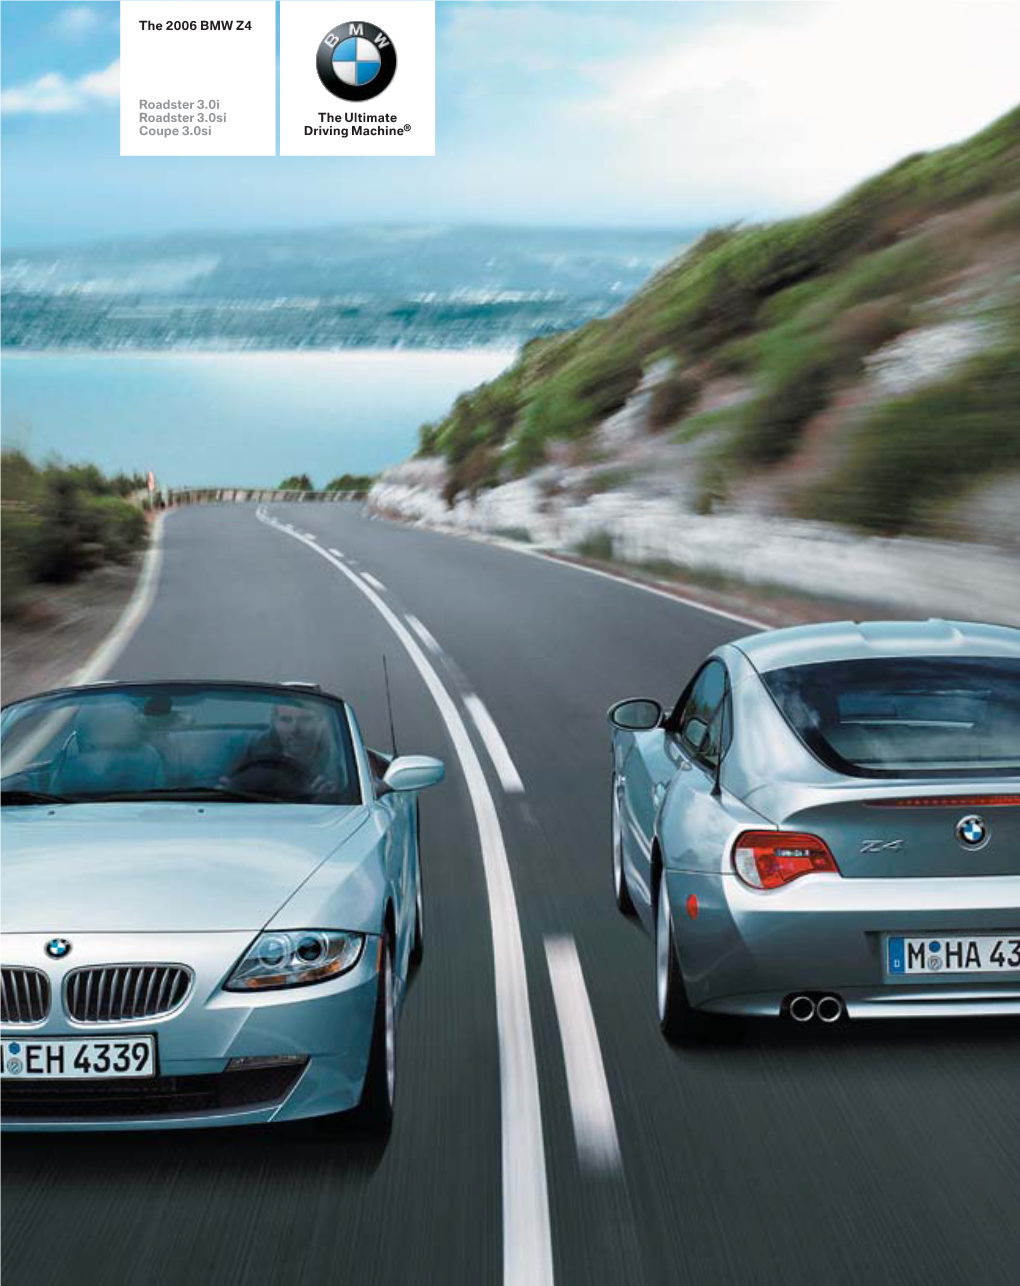 The Ultimate Driving Machine® the 2006 BMW Z4 Roadster 3.0I